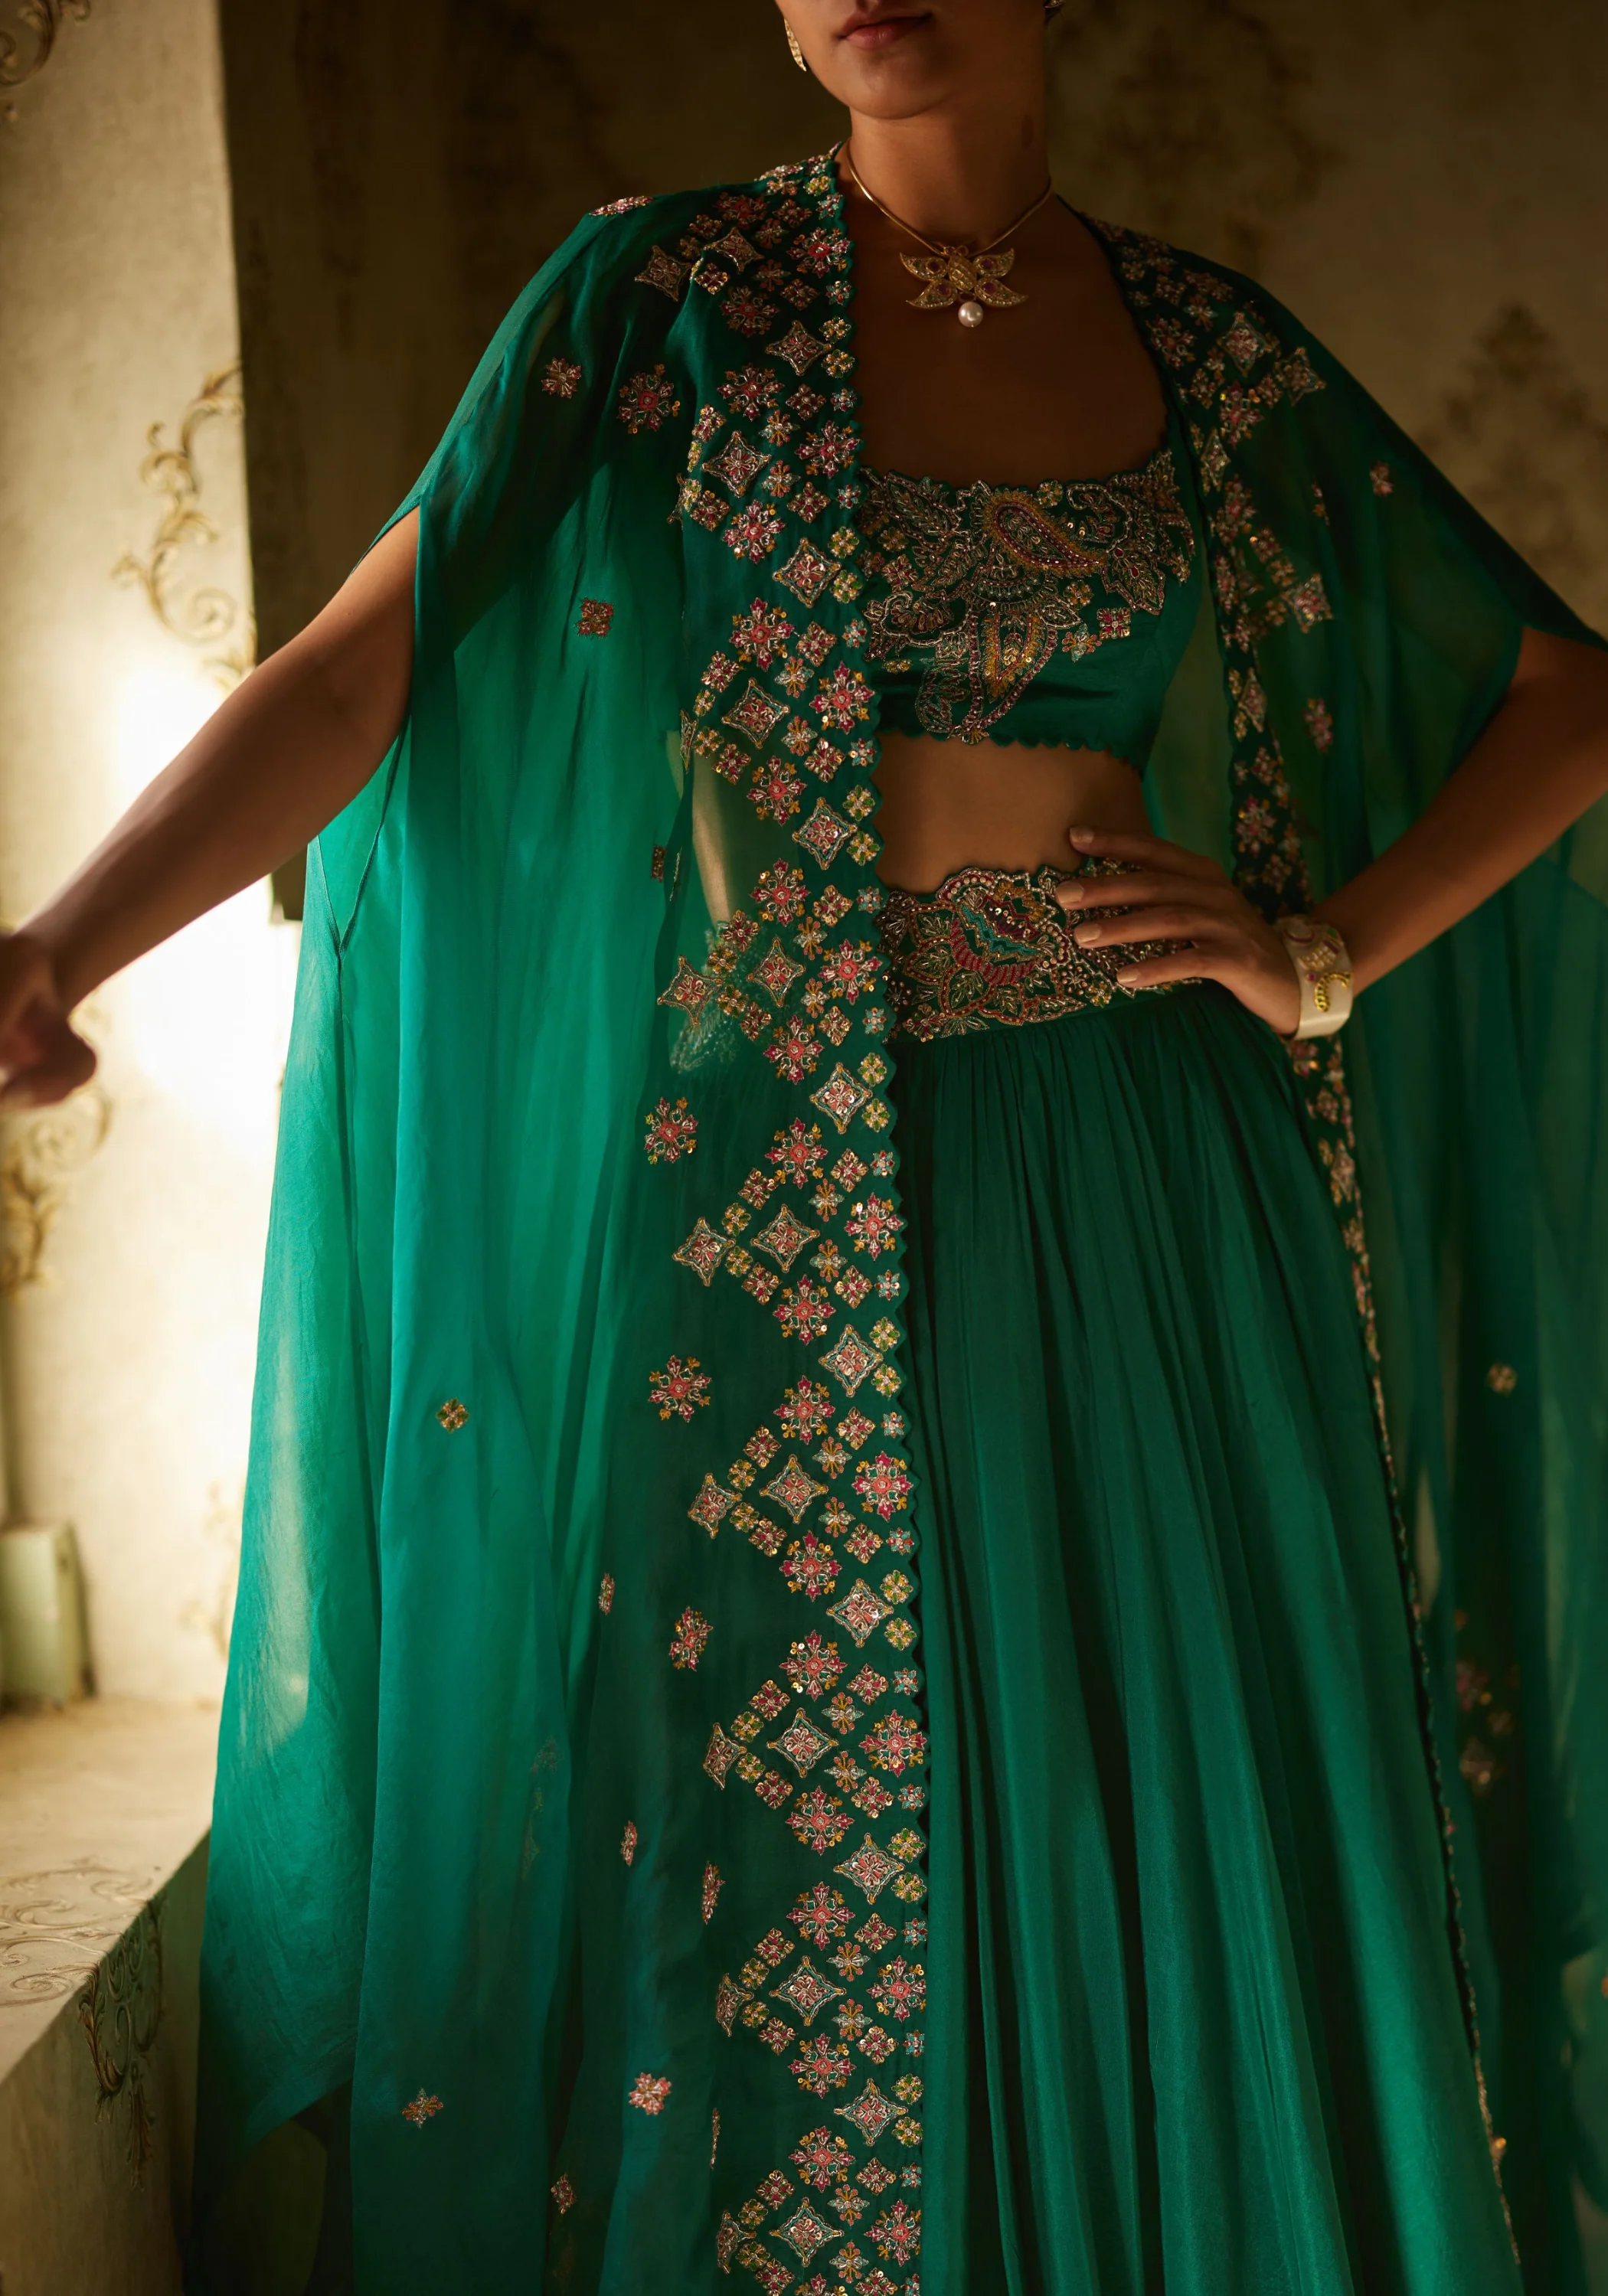 Discover the Timeless Elegance of Evoluzione's Lehenga Set Collection